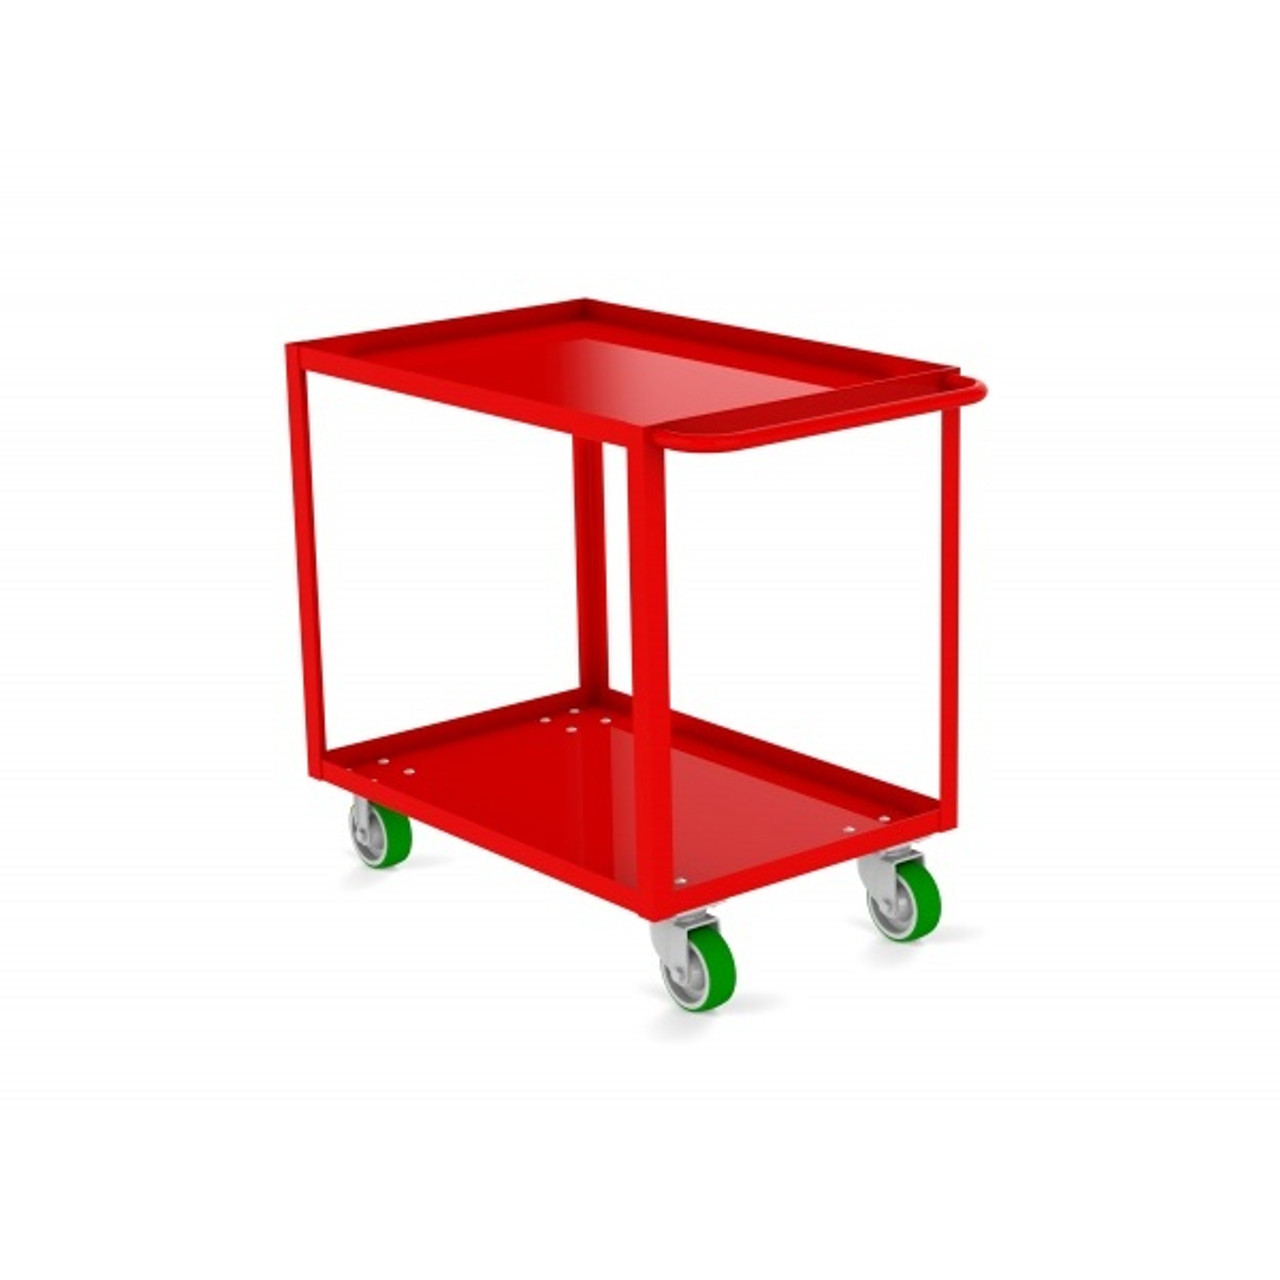 Valley Craft Two Shelf 30 x 48" Utility Cart, Red with Poly Casters (CALL FOR BEST PRICING)